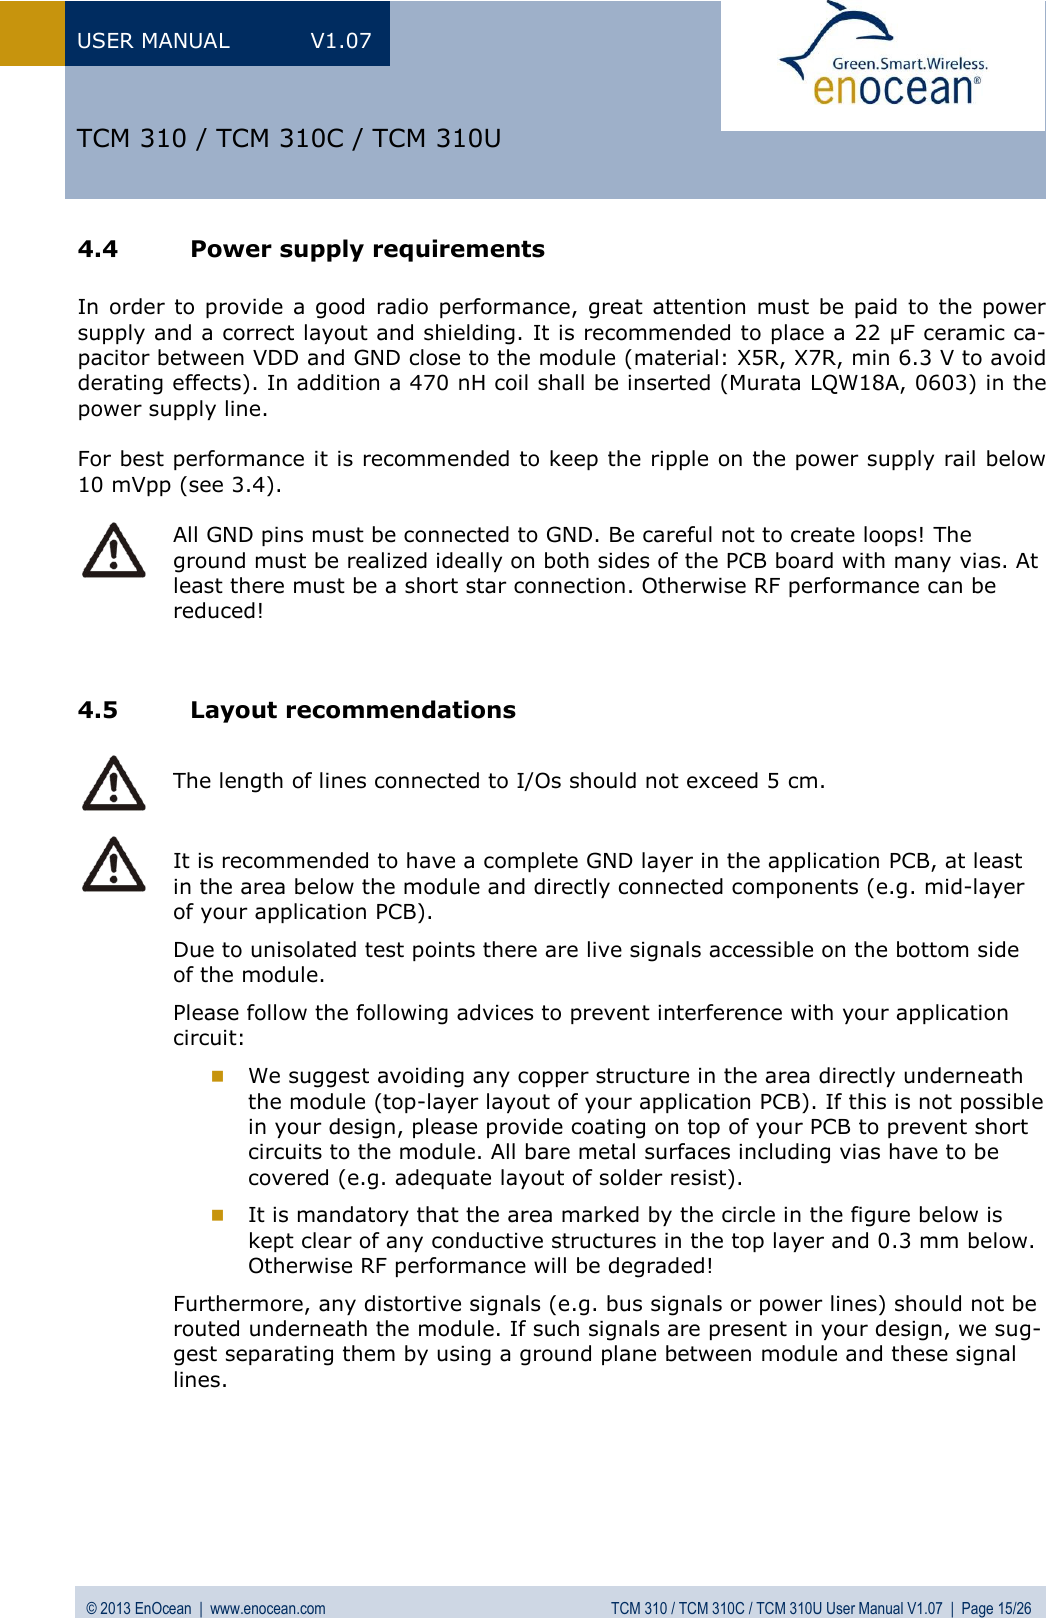 USER MANUAL  V1.07 © 2013 EnOcean  |  www.enocean.com  TCM 310 / TCM 310C / TCM 310U User Manual V1.07  |  Page 15/26   TCM 310 / TCM 310C / TCM 310U 4.4 Power supply requirements  In order to provide a  good  radio  performance, great attention must be paid  to the power supply and a correct layout and shielding. It is recommended to place a 22 µF ceramic ca-pacitor between VDD and GND close to the module (material: X5R, X7R, min 6.3 V to avoid derating effects). In addition a 470 nH coil shall be inserted (Murata LQW18A, 0603) in the power supply line.  For best performance it is recommended to keep the ripple on the power supply rail below 10 mVpp (see 3.4).   All GND pins must be connected to GND. Be careful not to create loops! The ground must be realized ideally on both sides of the PCB board with many vias. At least there must be a short star connection. Otherwise RF performance can be reduced!   4.5 Layout recommendations   The length of lines connected to I/Os should not exceed 5 cm.   It is recommended to have a complete GND layer in the application PCB, at least in the area below the module and directly connected components (e.g. mid-layer of your application PCB).  Due to unisolated test points there are live signals accessible on the bottom side of the module. Please follow the following advices to prevent interference with your application circuit:   We suggest avoiding any copper structure in the area directly underneath the module (top-layer layout of your application PCB). If this is not possible in your design, please provide coating on top of your PCB to prevent short circuits to the module. All bare metal surfaces including vias have to be covered (e.g. adequate layout of solder resist).  It is mandatory that the area marked by the circle in the figure below is kept clear of any conductive structures in the top layer and 0.3 mm below. Otherwise RF performance will be degraded! Furthermore, any distortive signals (e.g. bus signals or power lines) should not be routed underneath the module. If such signals are present in your design, we sug-gest separating them by using a ground plane between module and these signal lines.      